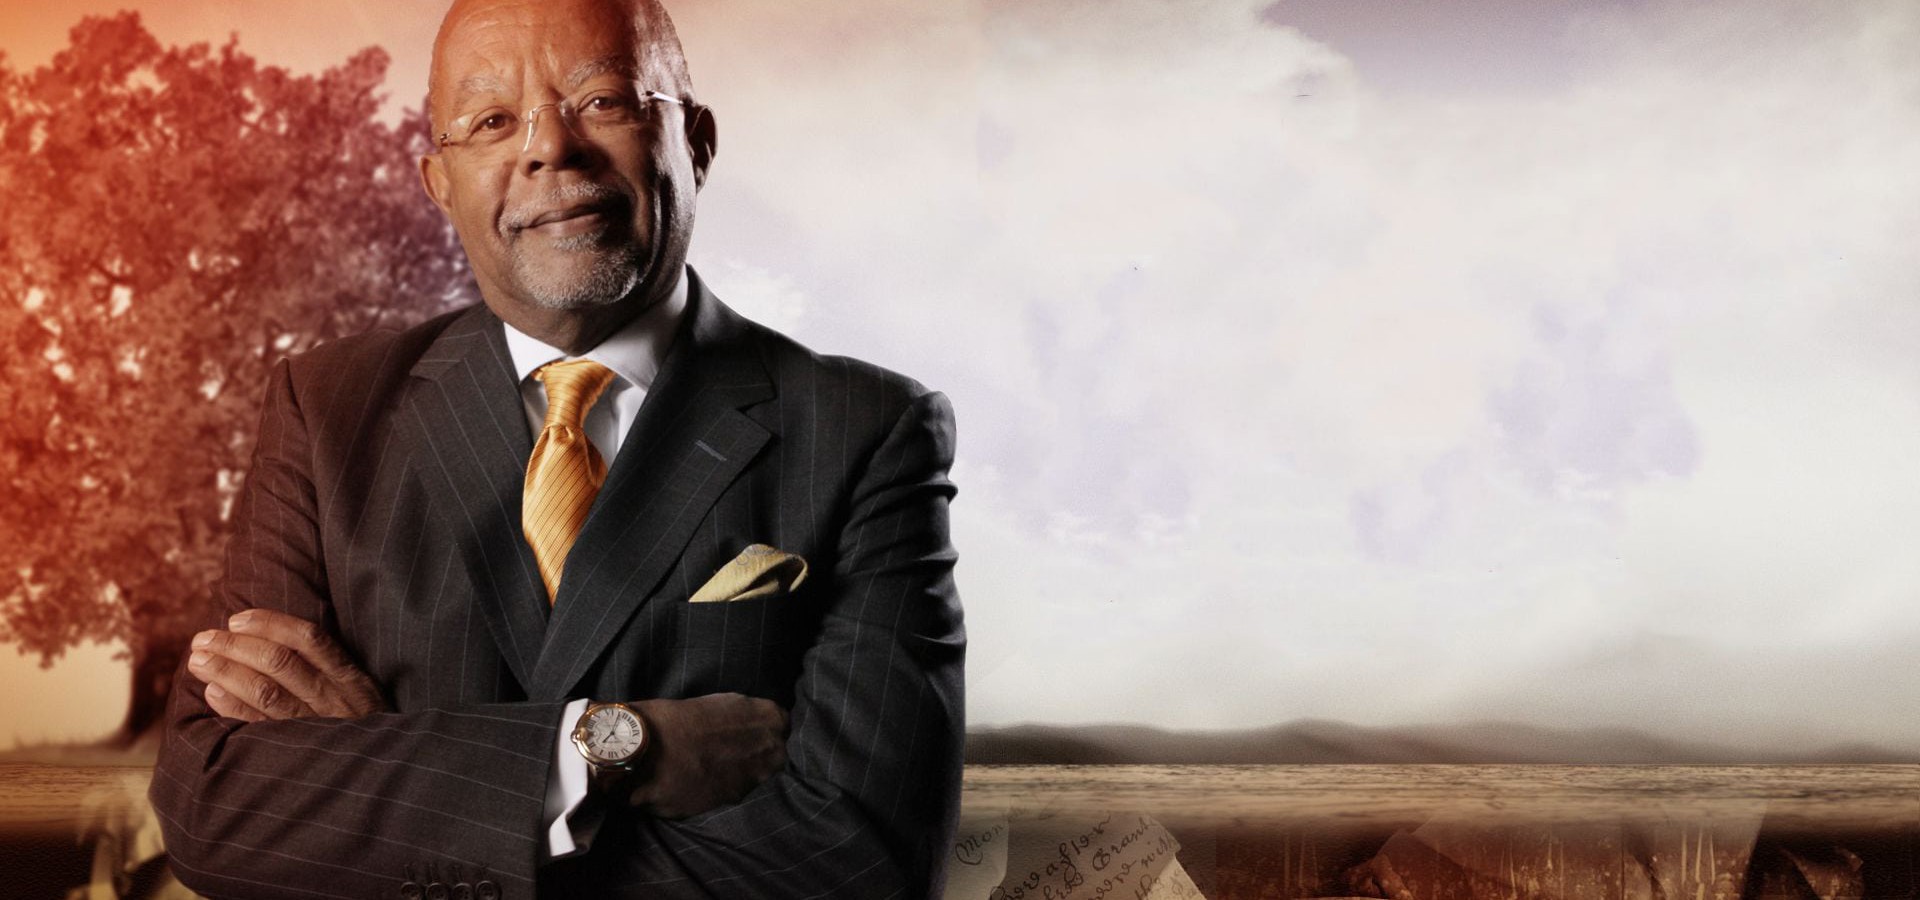 Finding Your Roots Season 6 - watch episodes streaming online